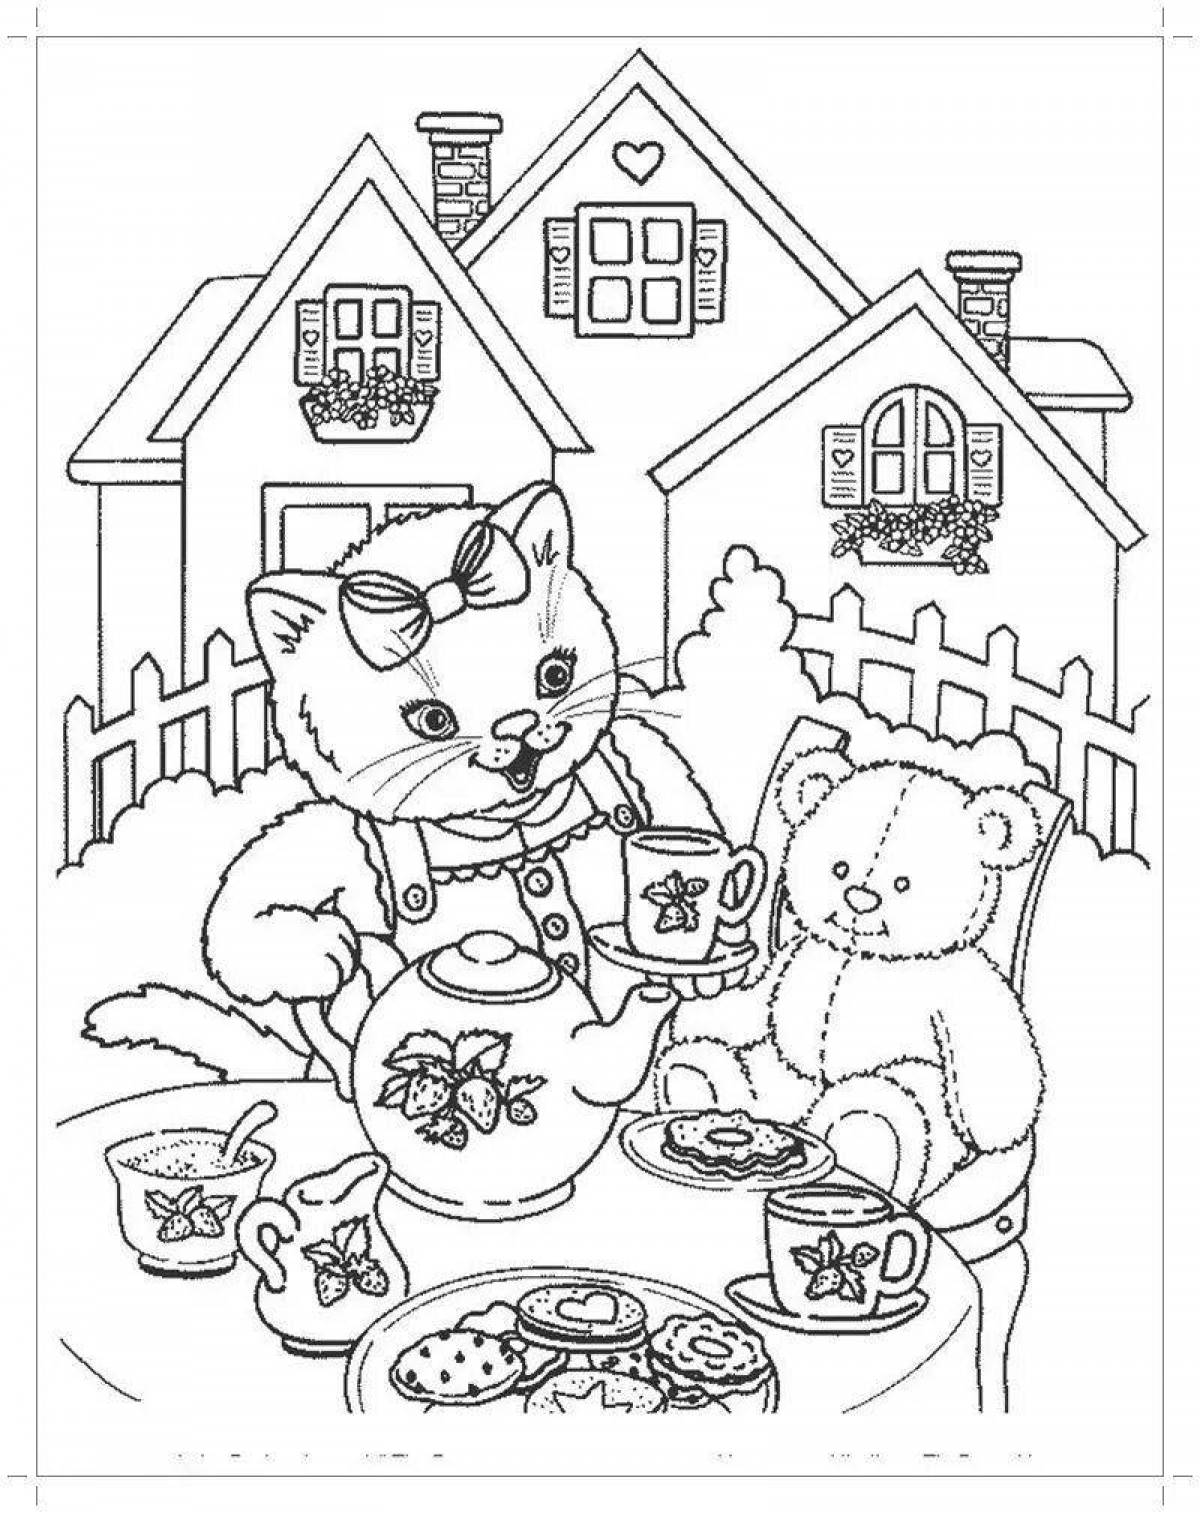 Colorful animal house coloring page